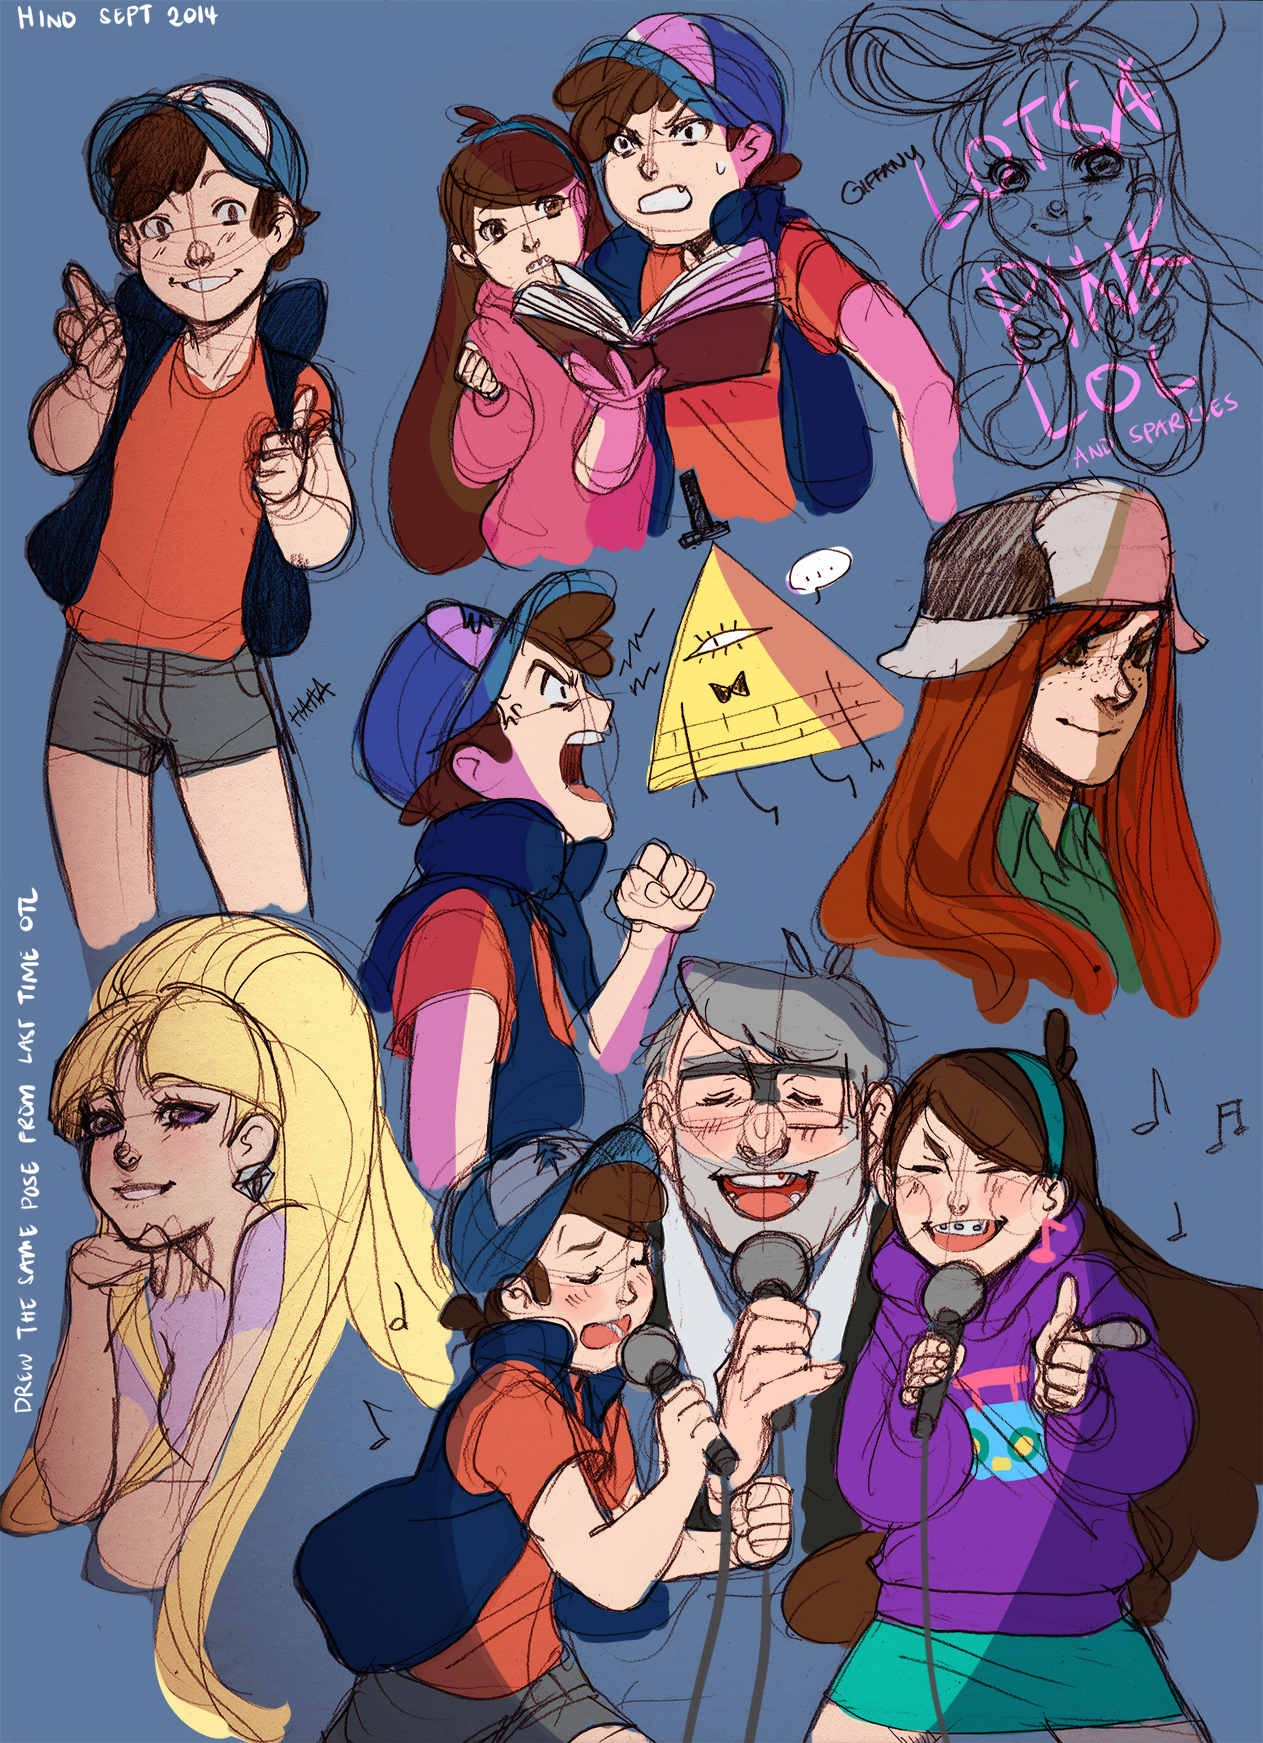 Free download Gravity Falls Aoshima by MadMaddie [1883x1608] for your